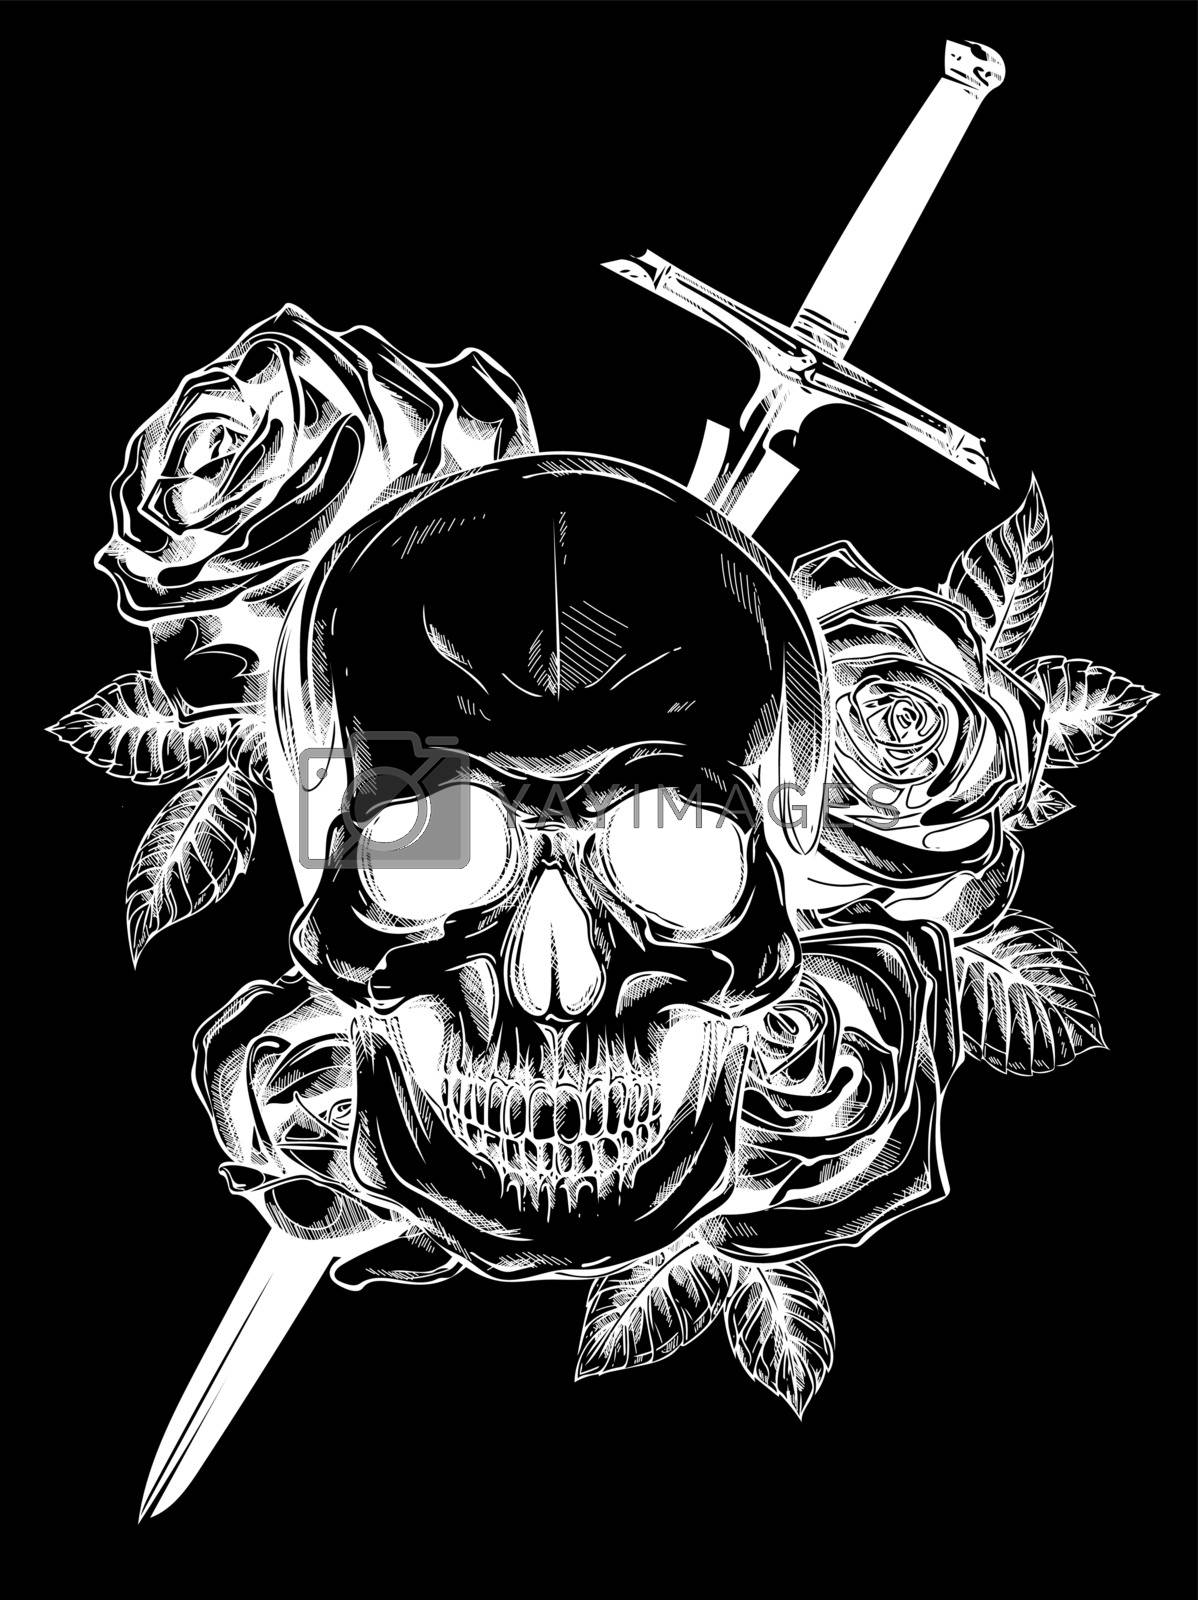 Royalty free image of A human skull with roses on black background by dean